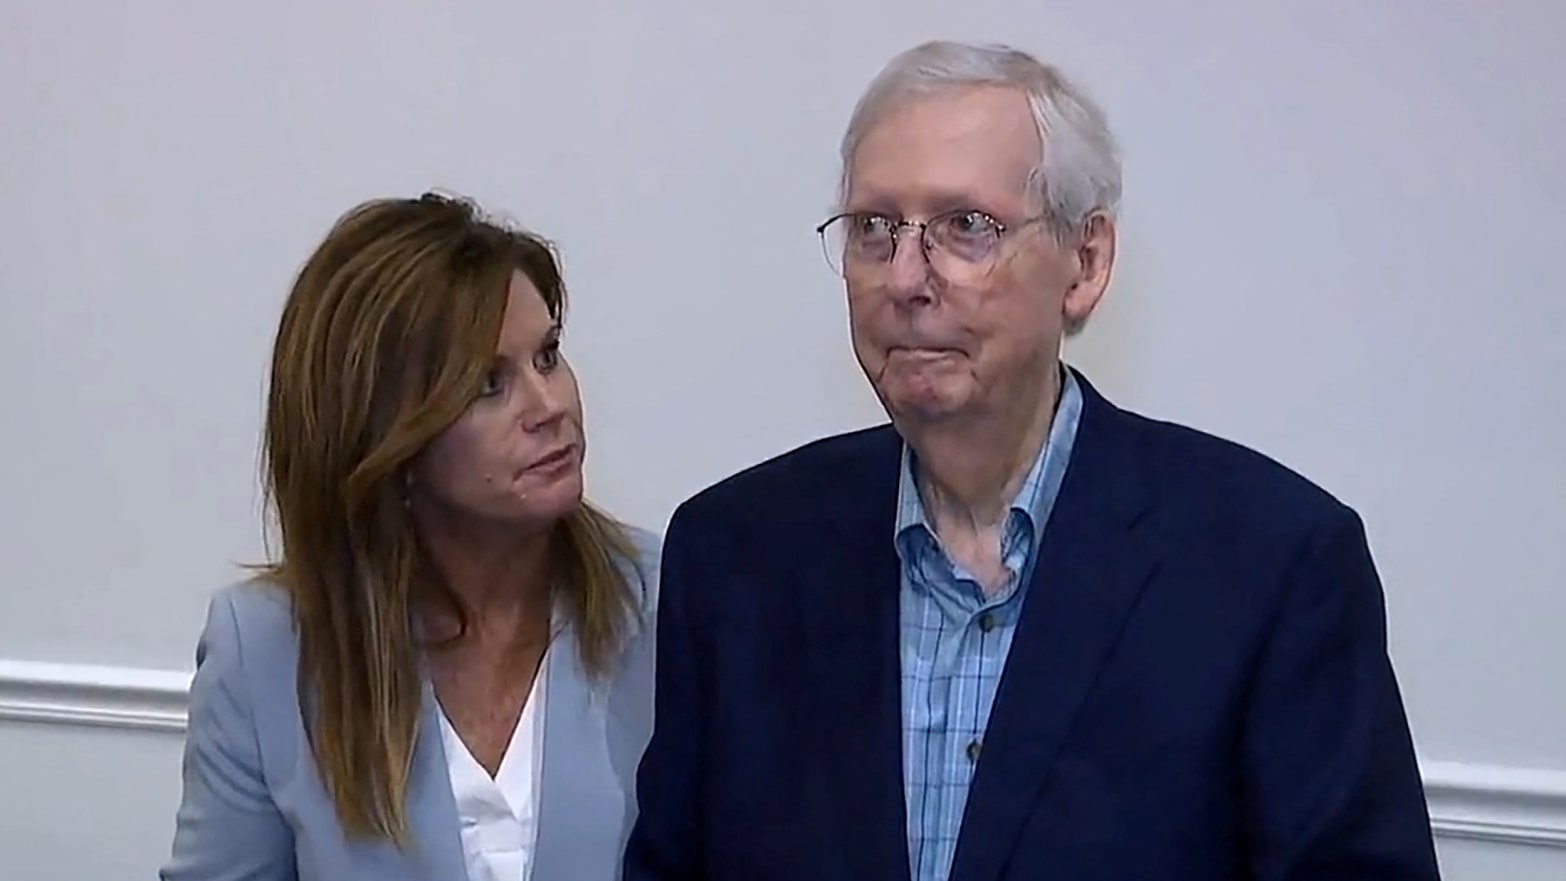 Mitch McConnell appears to freeze up for more than 30 seconds during a public appearance.